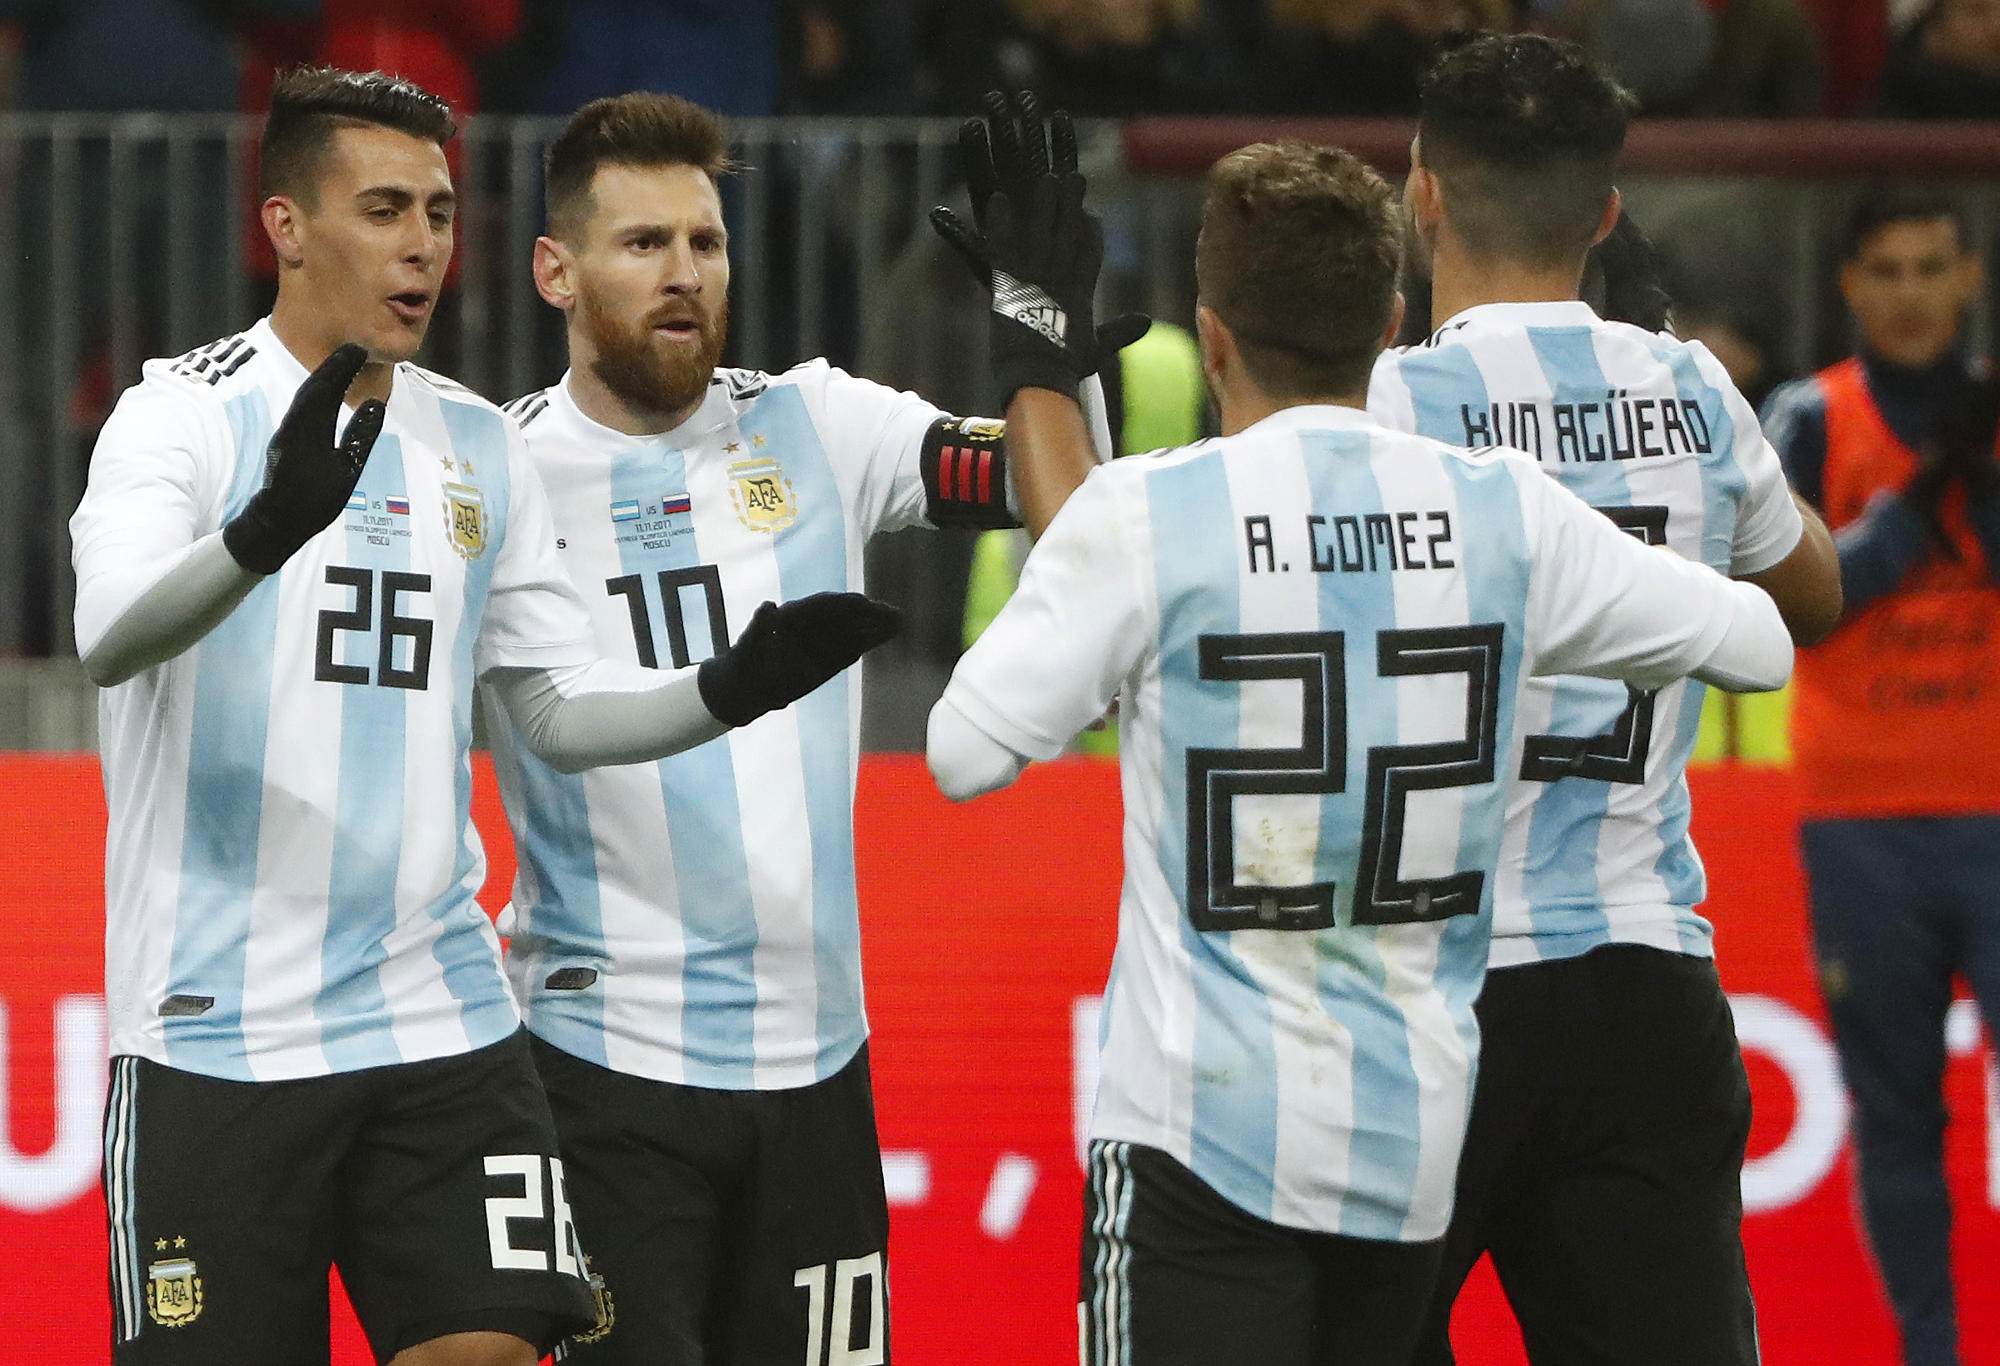 Sergio Aguero, Lionel Messia and other Argentinian teammates celebrate